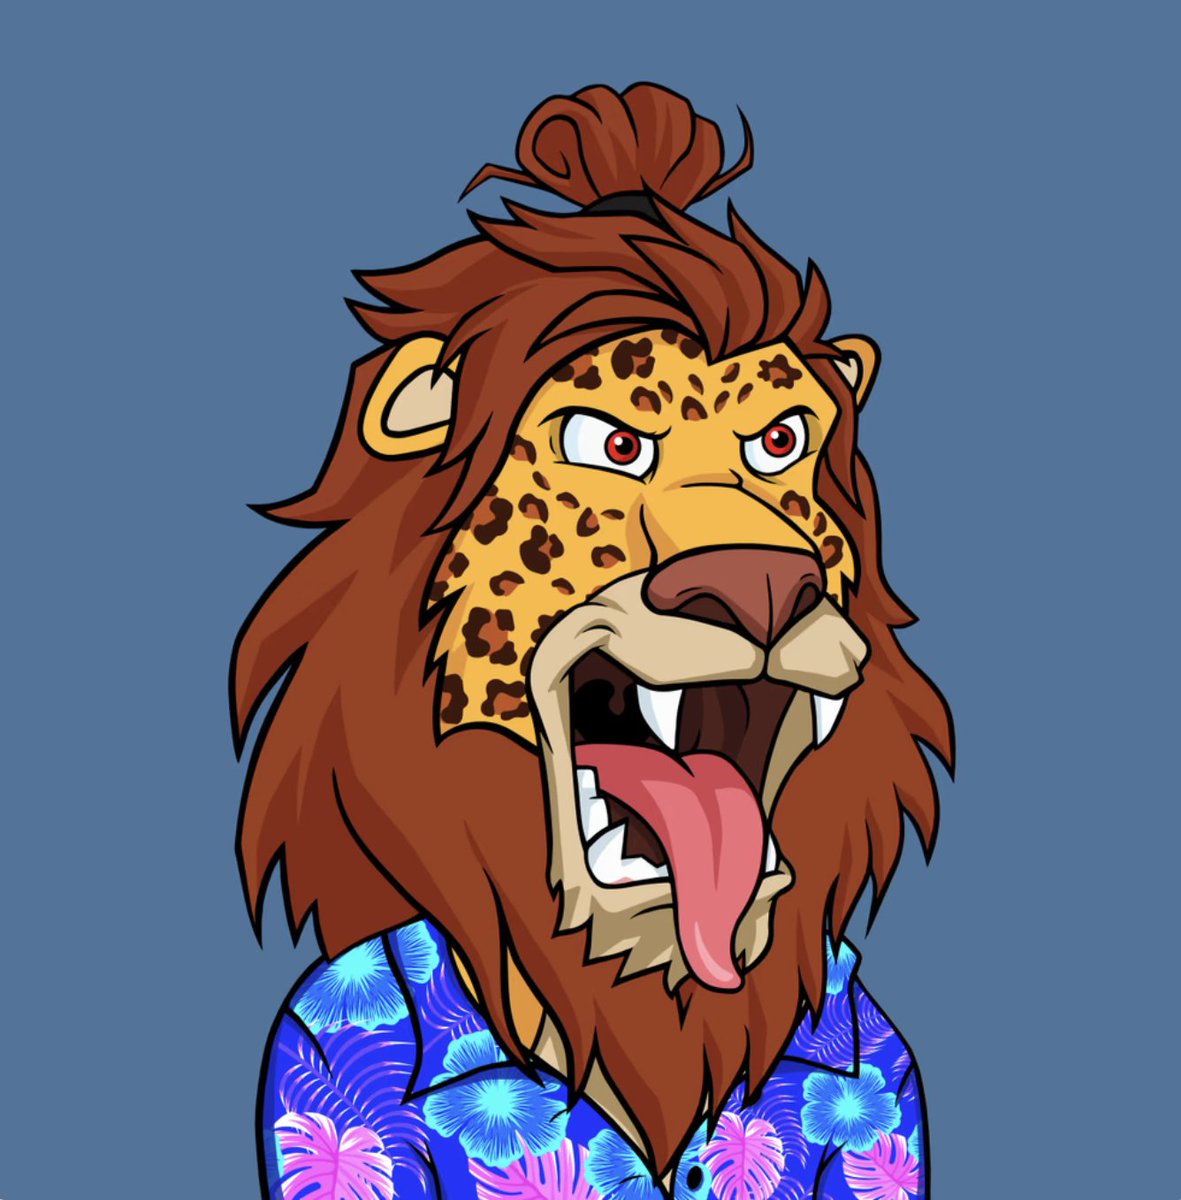 So even though I don't buy NFTs anymore, I bought one today and gave up my blue check to make it my PFP. How'd I do? Can I get some @LazyLionsNFT ROARs???